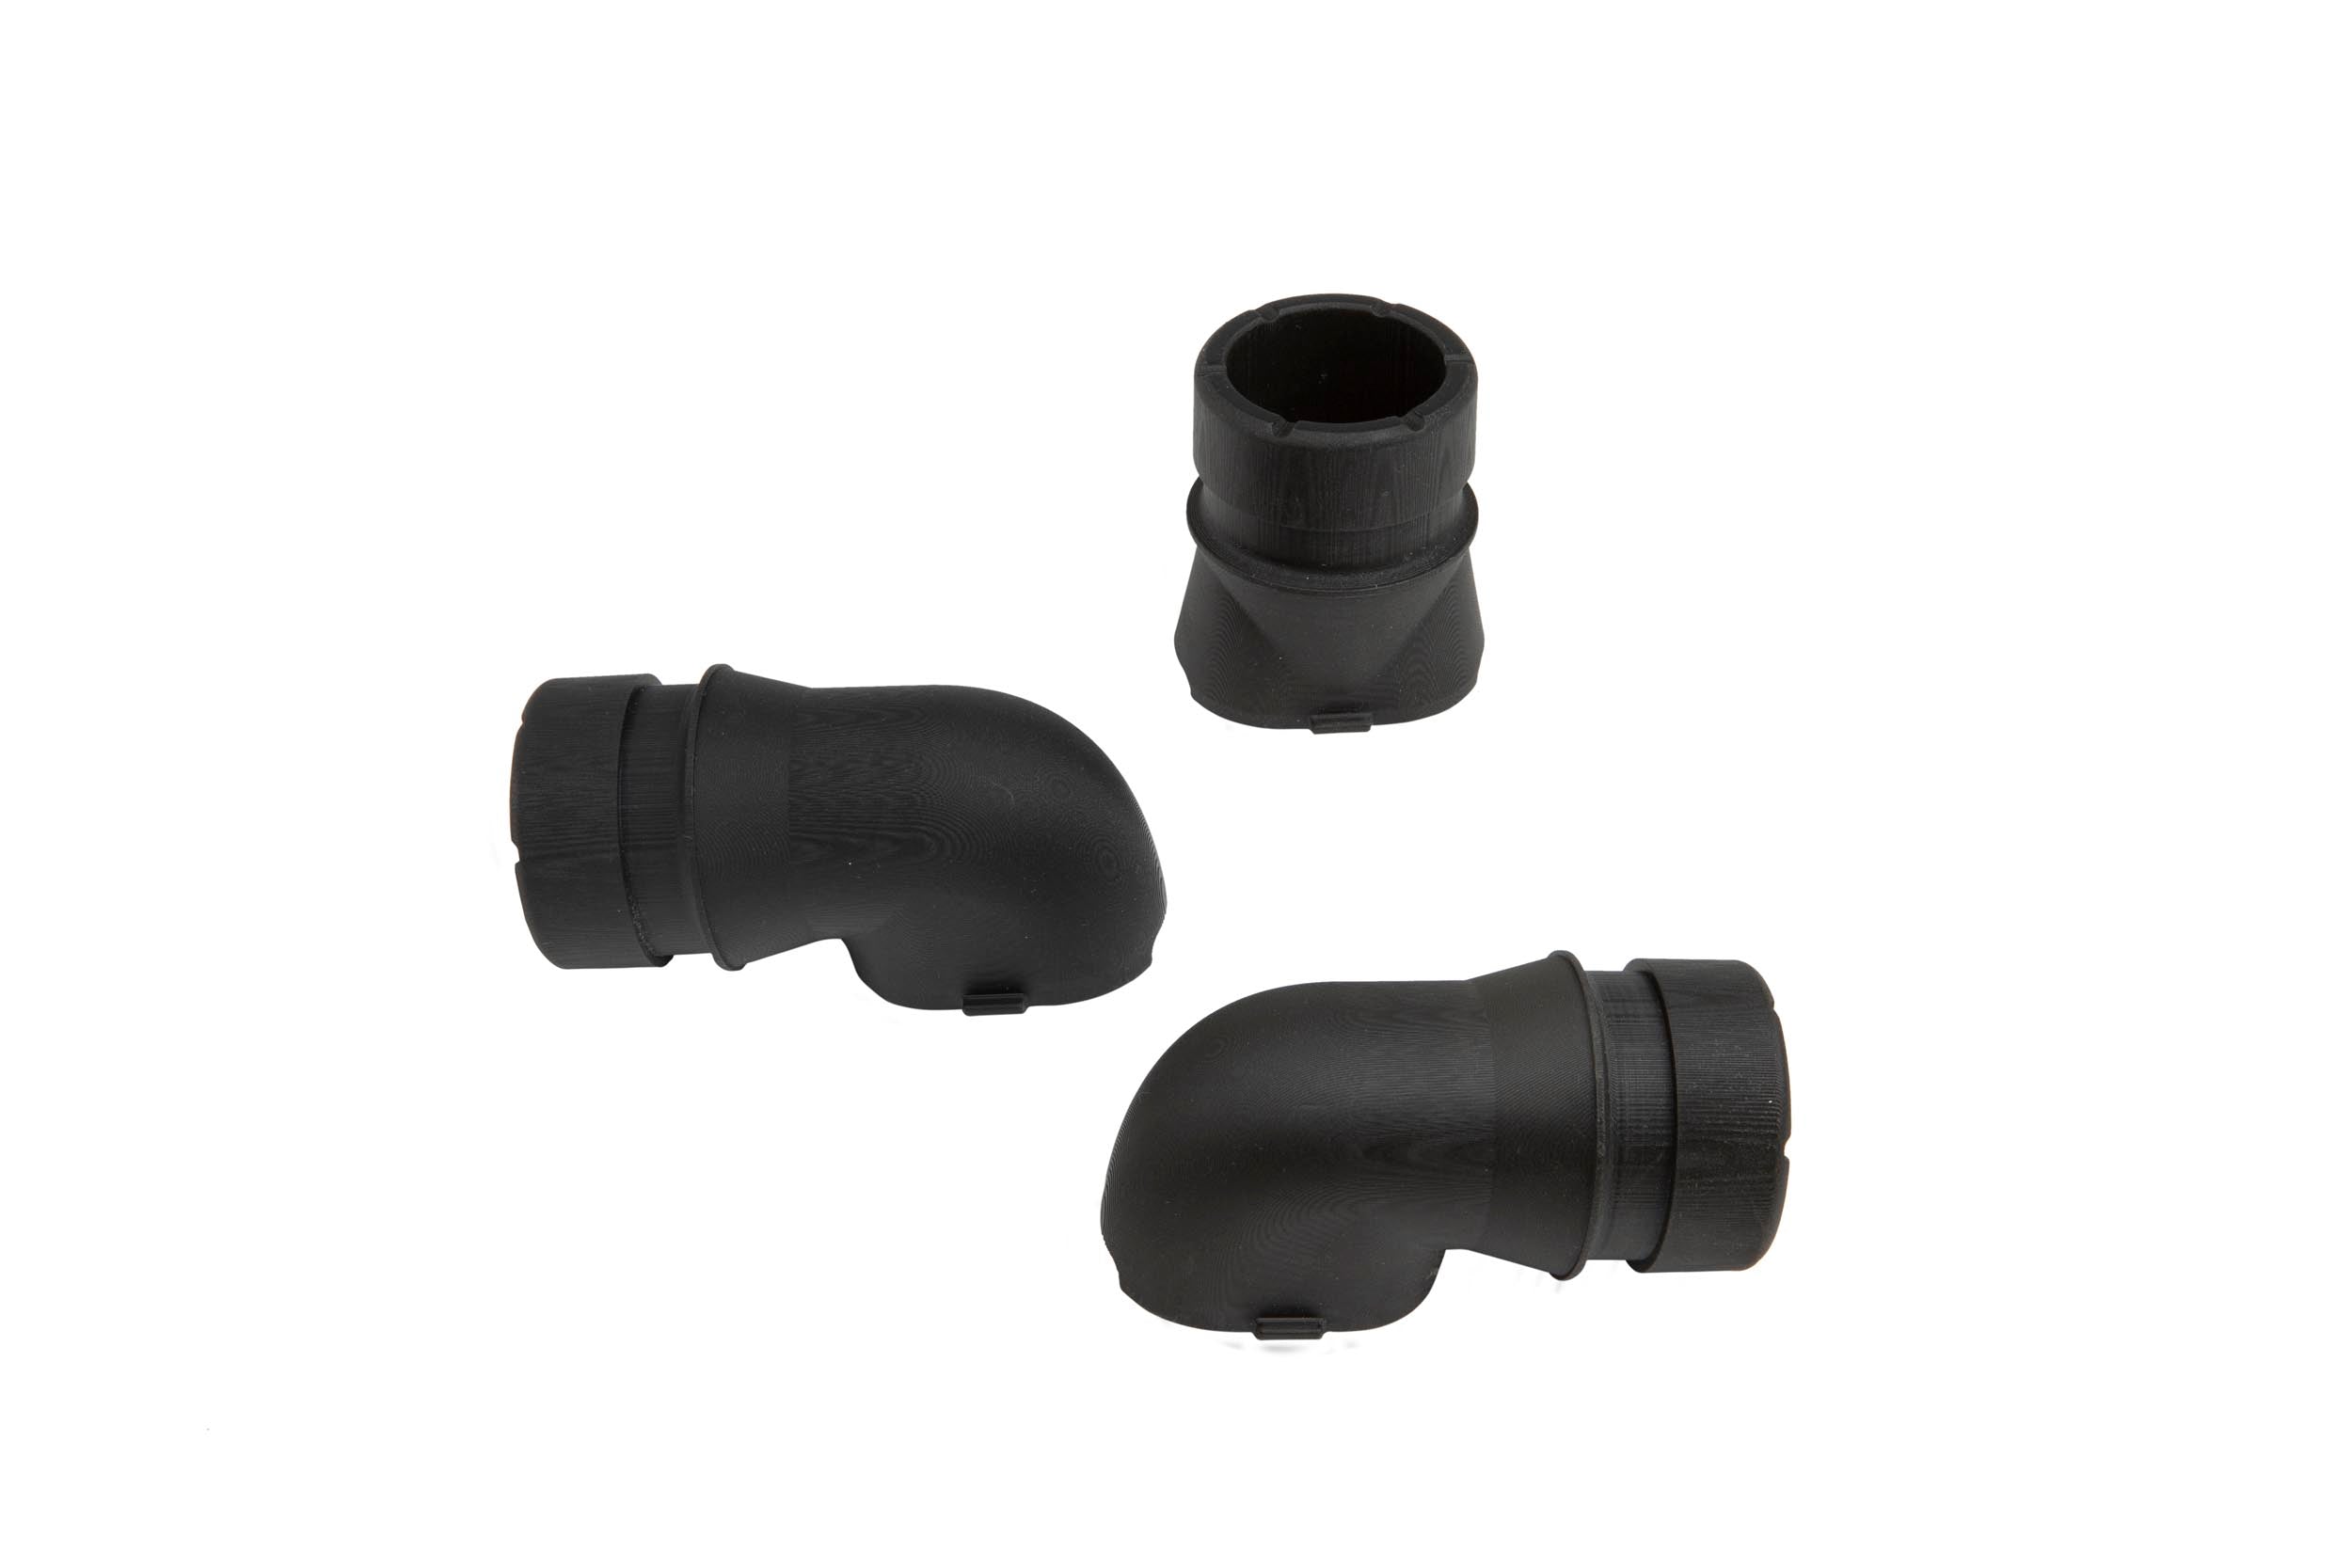 STILO YA0896 Modular Straight Fitting / 32mm (also compatible with Maglock® connector) Photo-1 